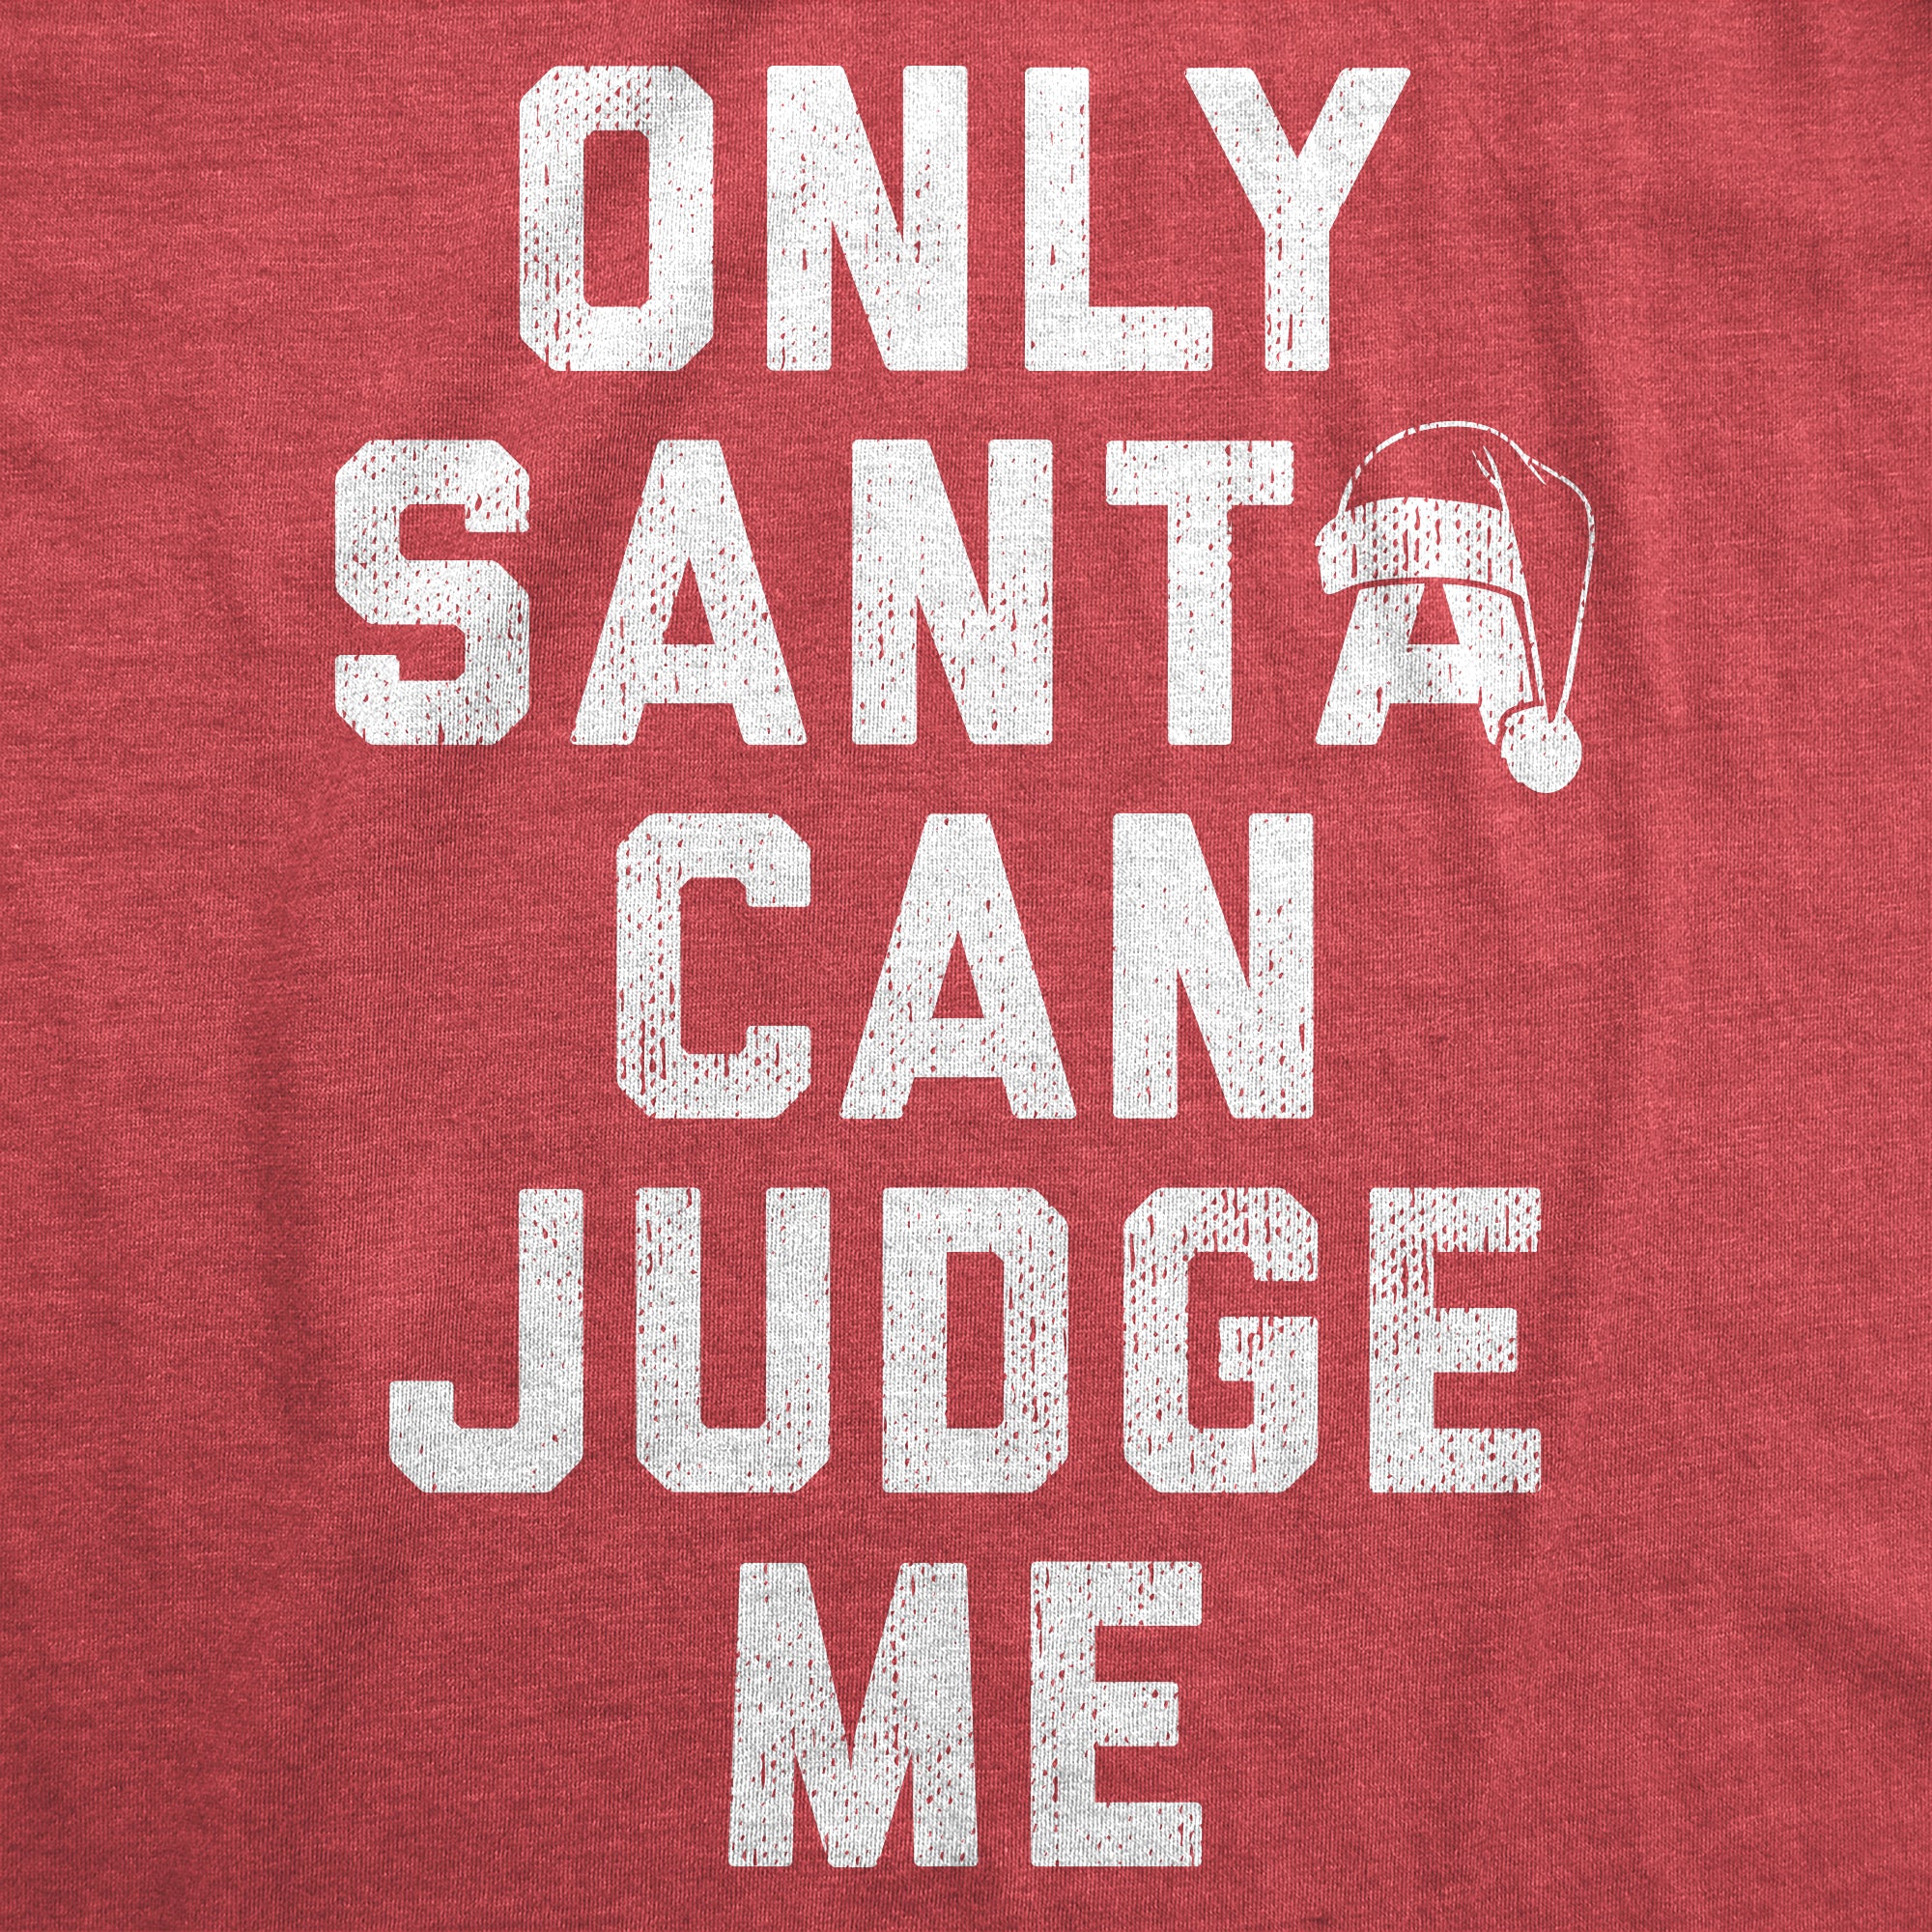 Funny Heather Red - Santa Judge Only Santa Can Judge Me Mens T Shirt Nerdy Christmas Sarcastic Tee